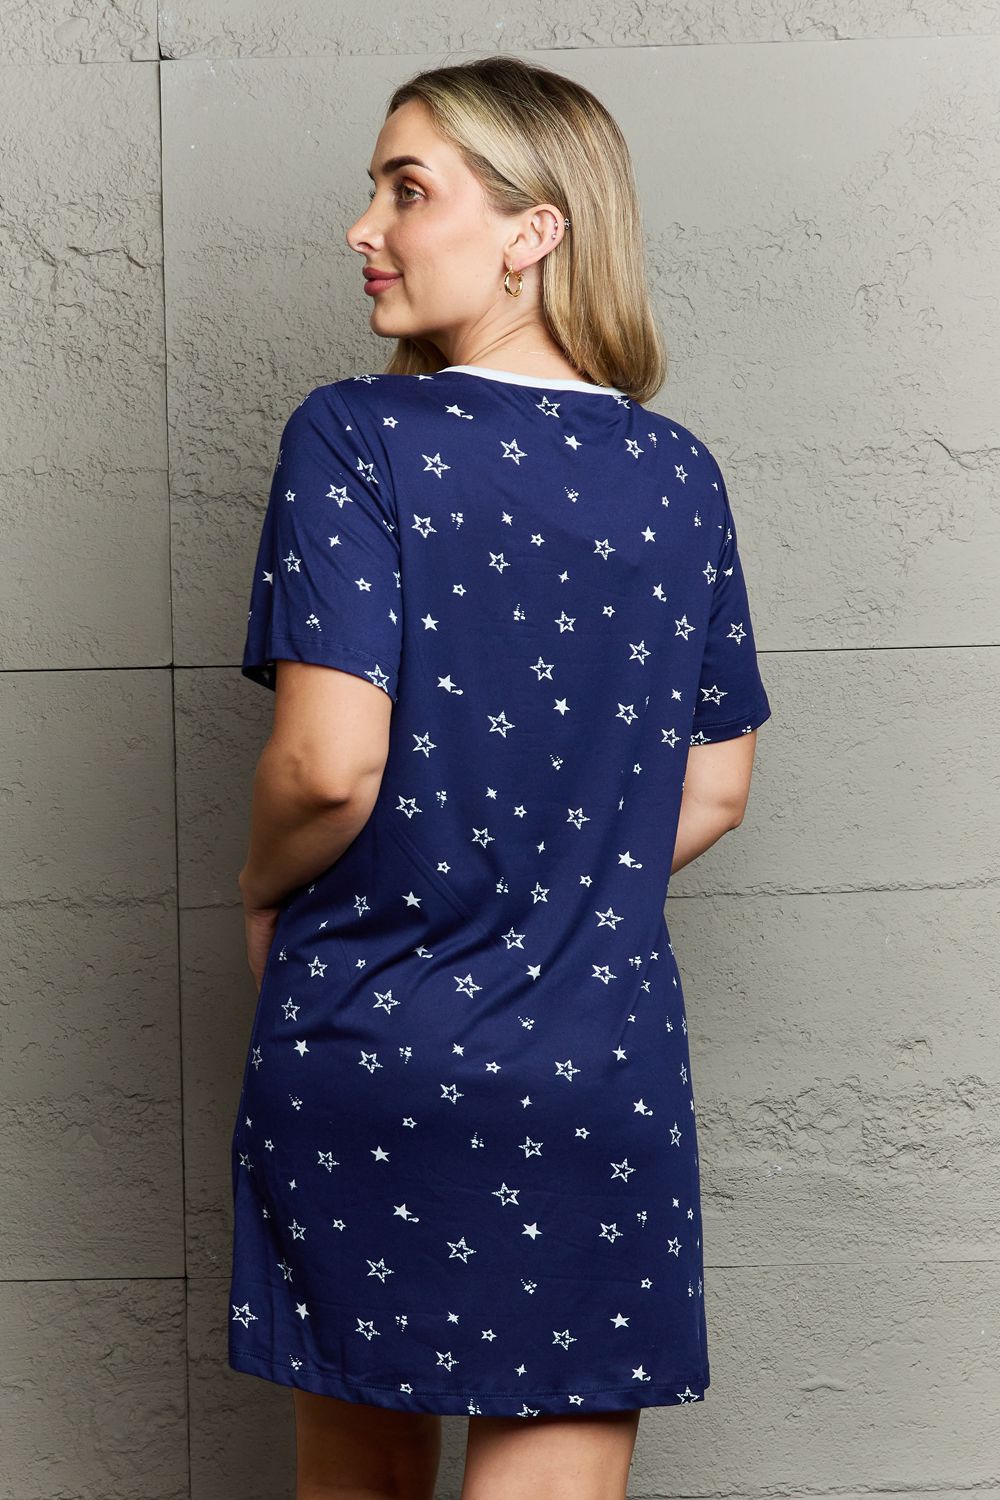 MOON NITE | Quilted Quivers Button Down Sleepwear Dress | us.meeeshop